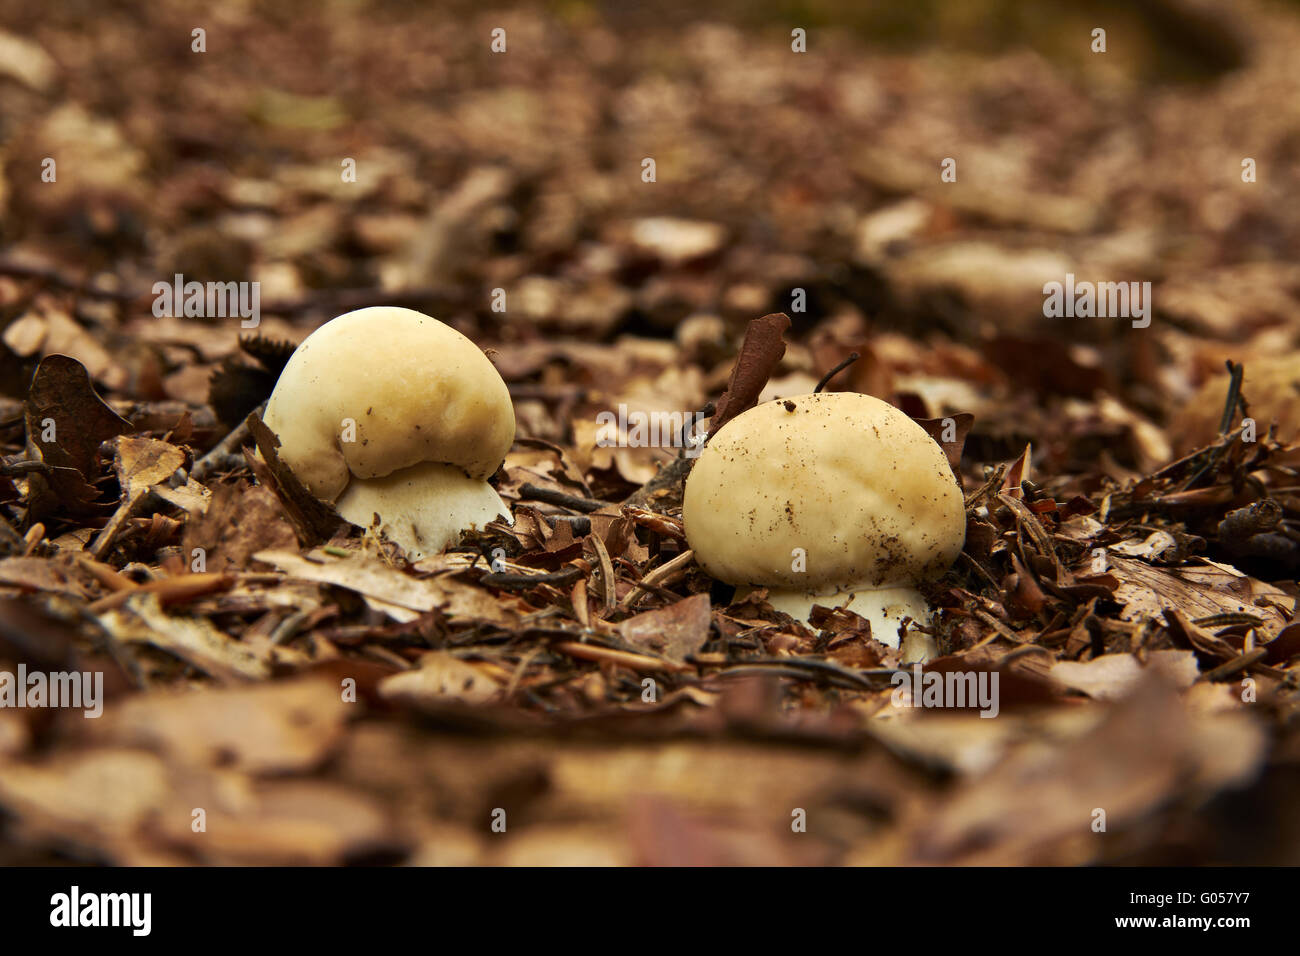 Young mushrooms on bottom leaves Stock Photo